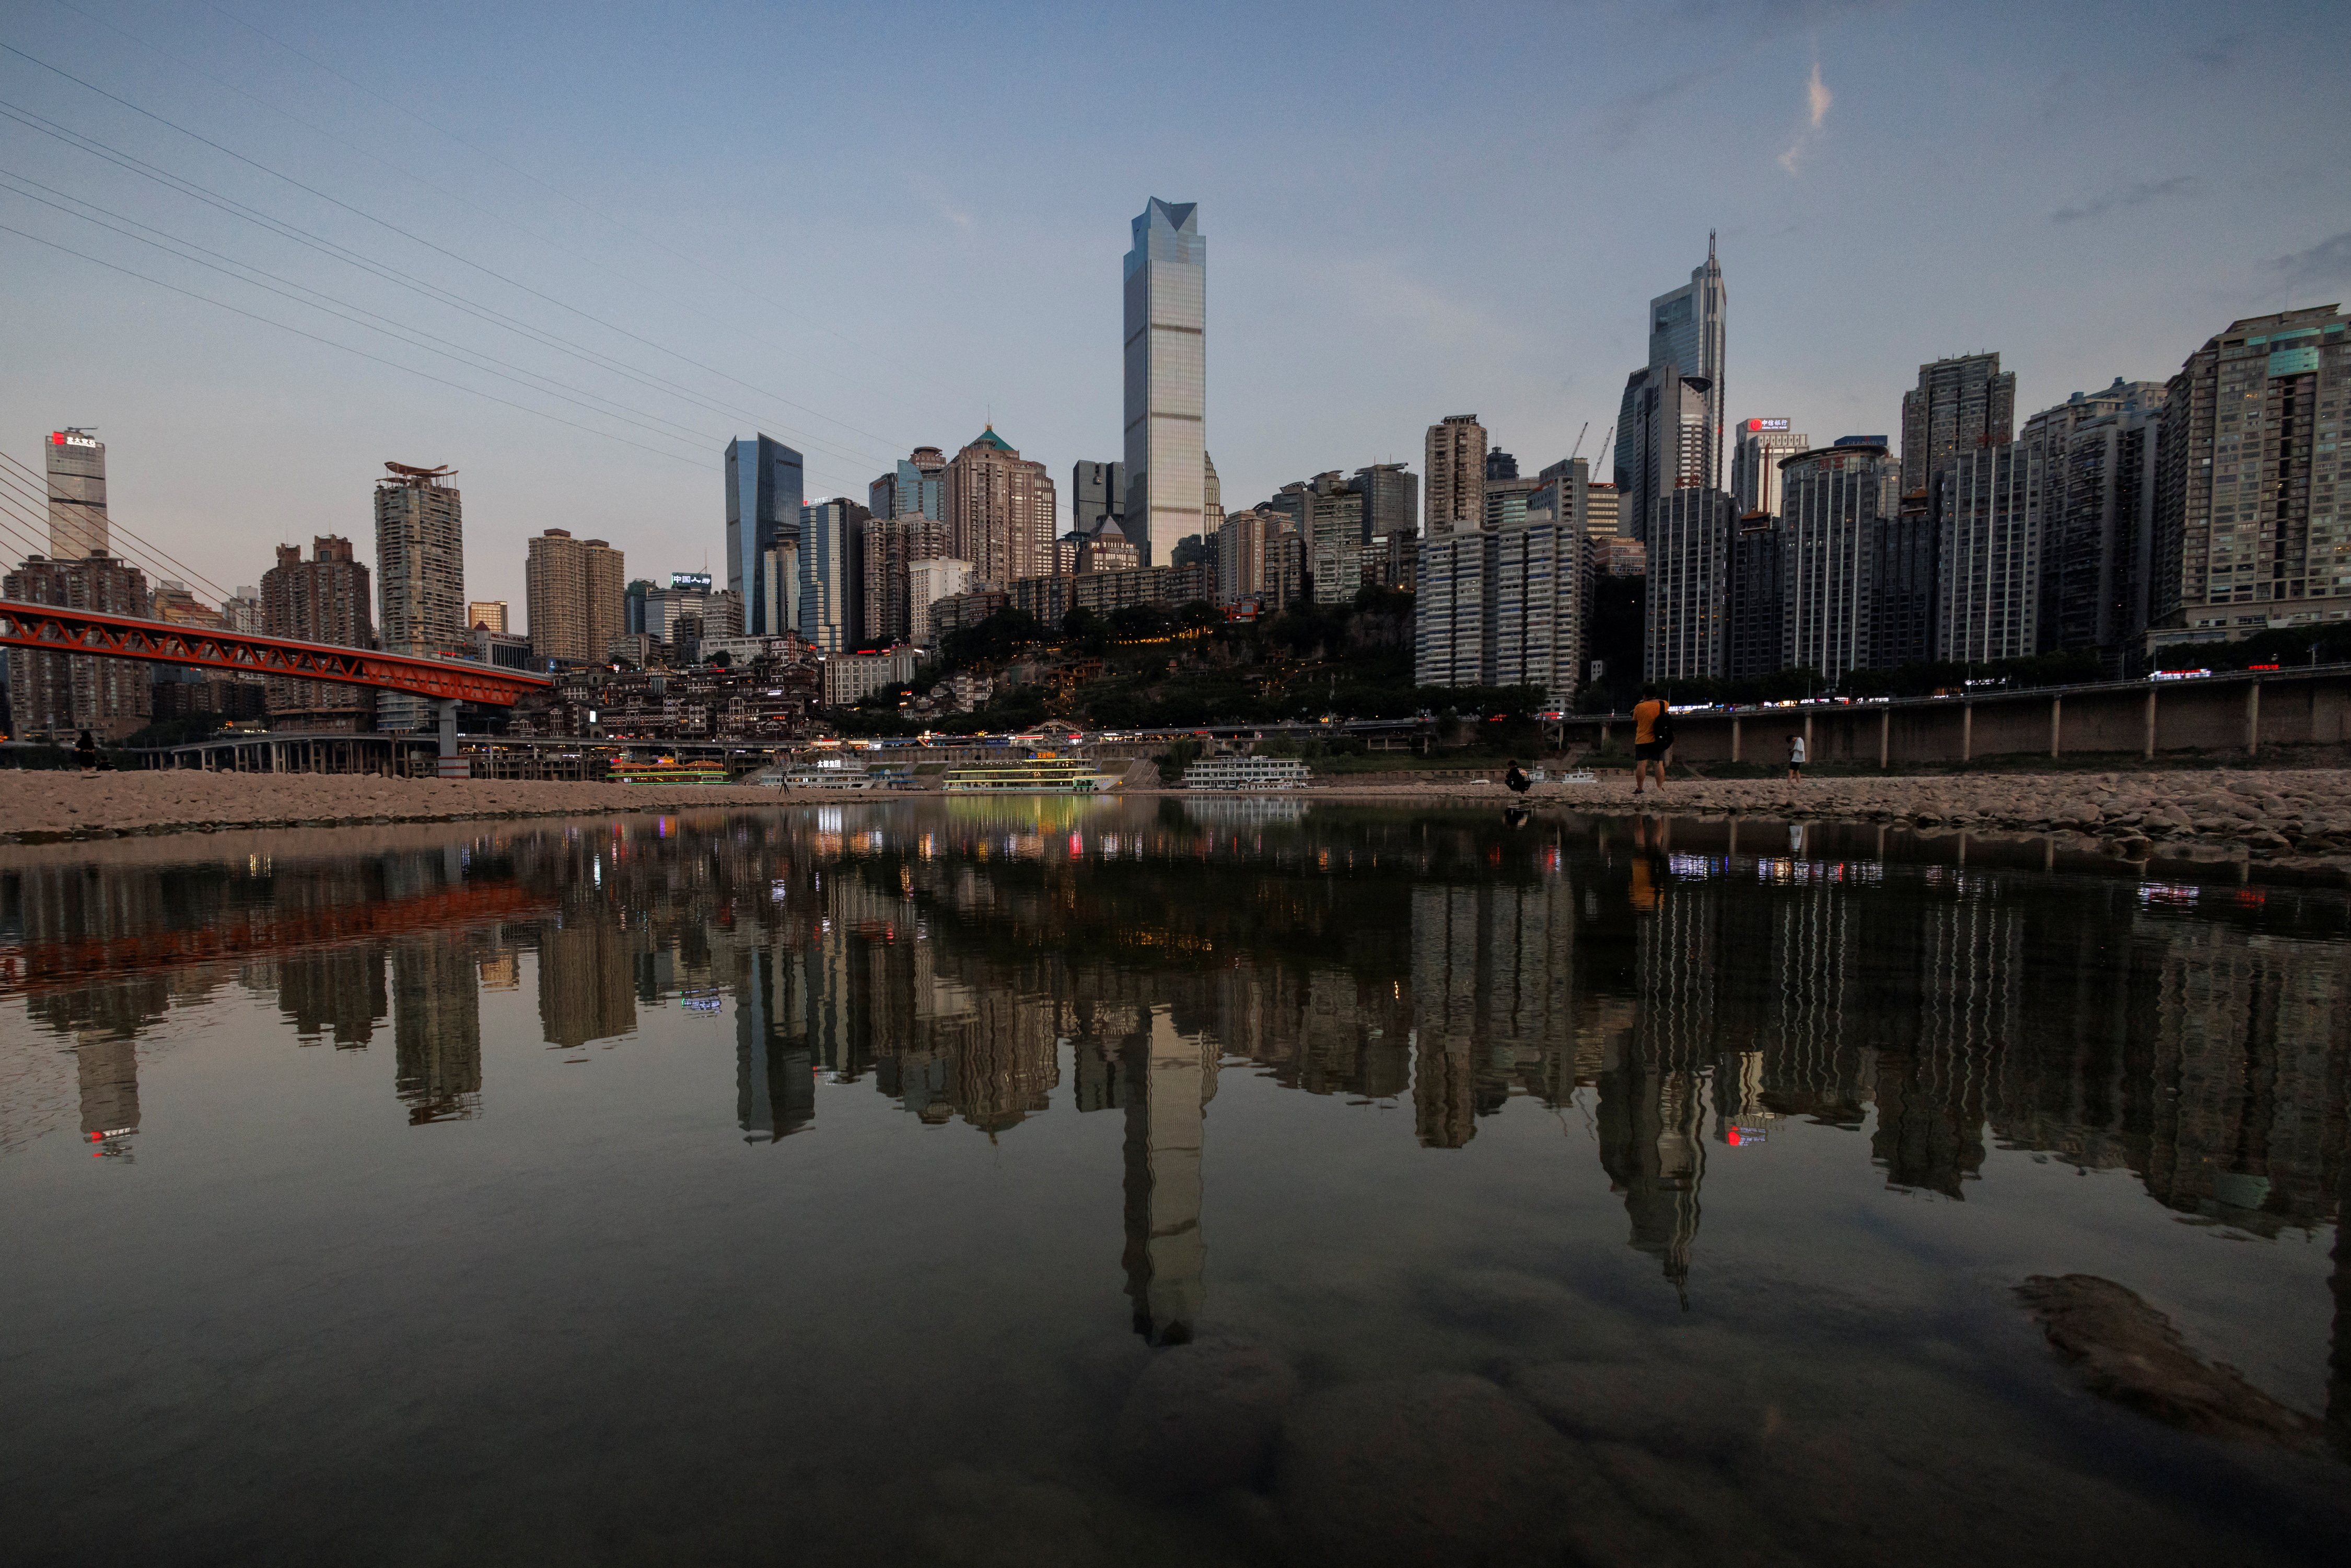 The city skyline is reflected in a pool left on the dry riverbed of the receding Jialing river, a tributary of the Yangtze, that is approaching record-low water levels during a regional drought in Chongqing